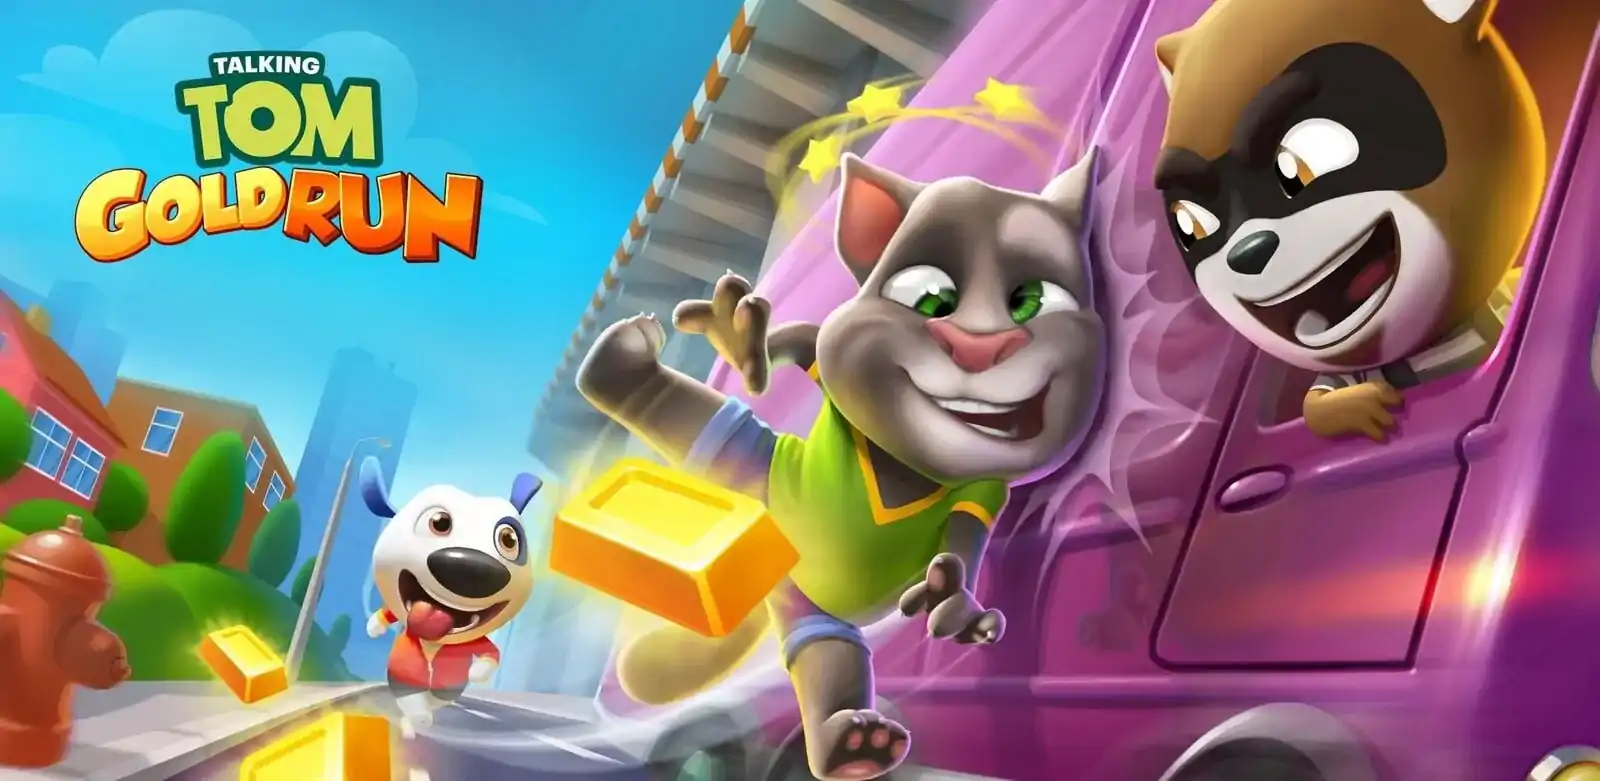 Talking Tom Gold Run outfit7 финиш